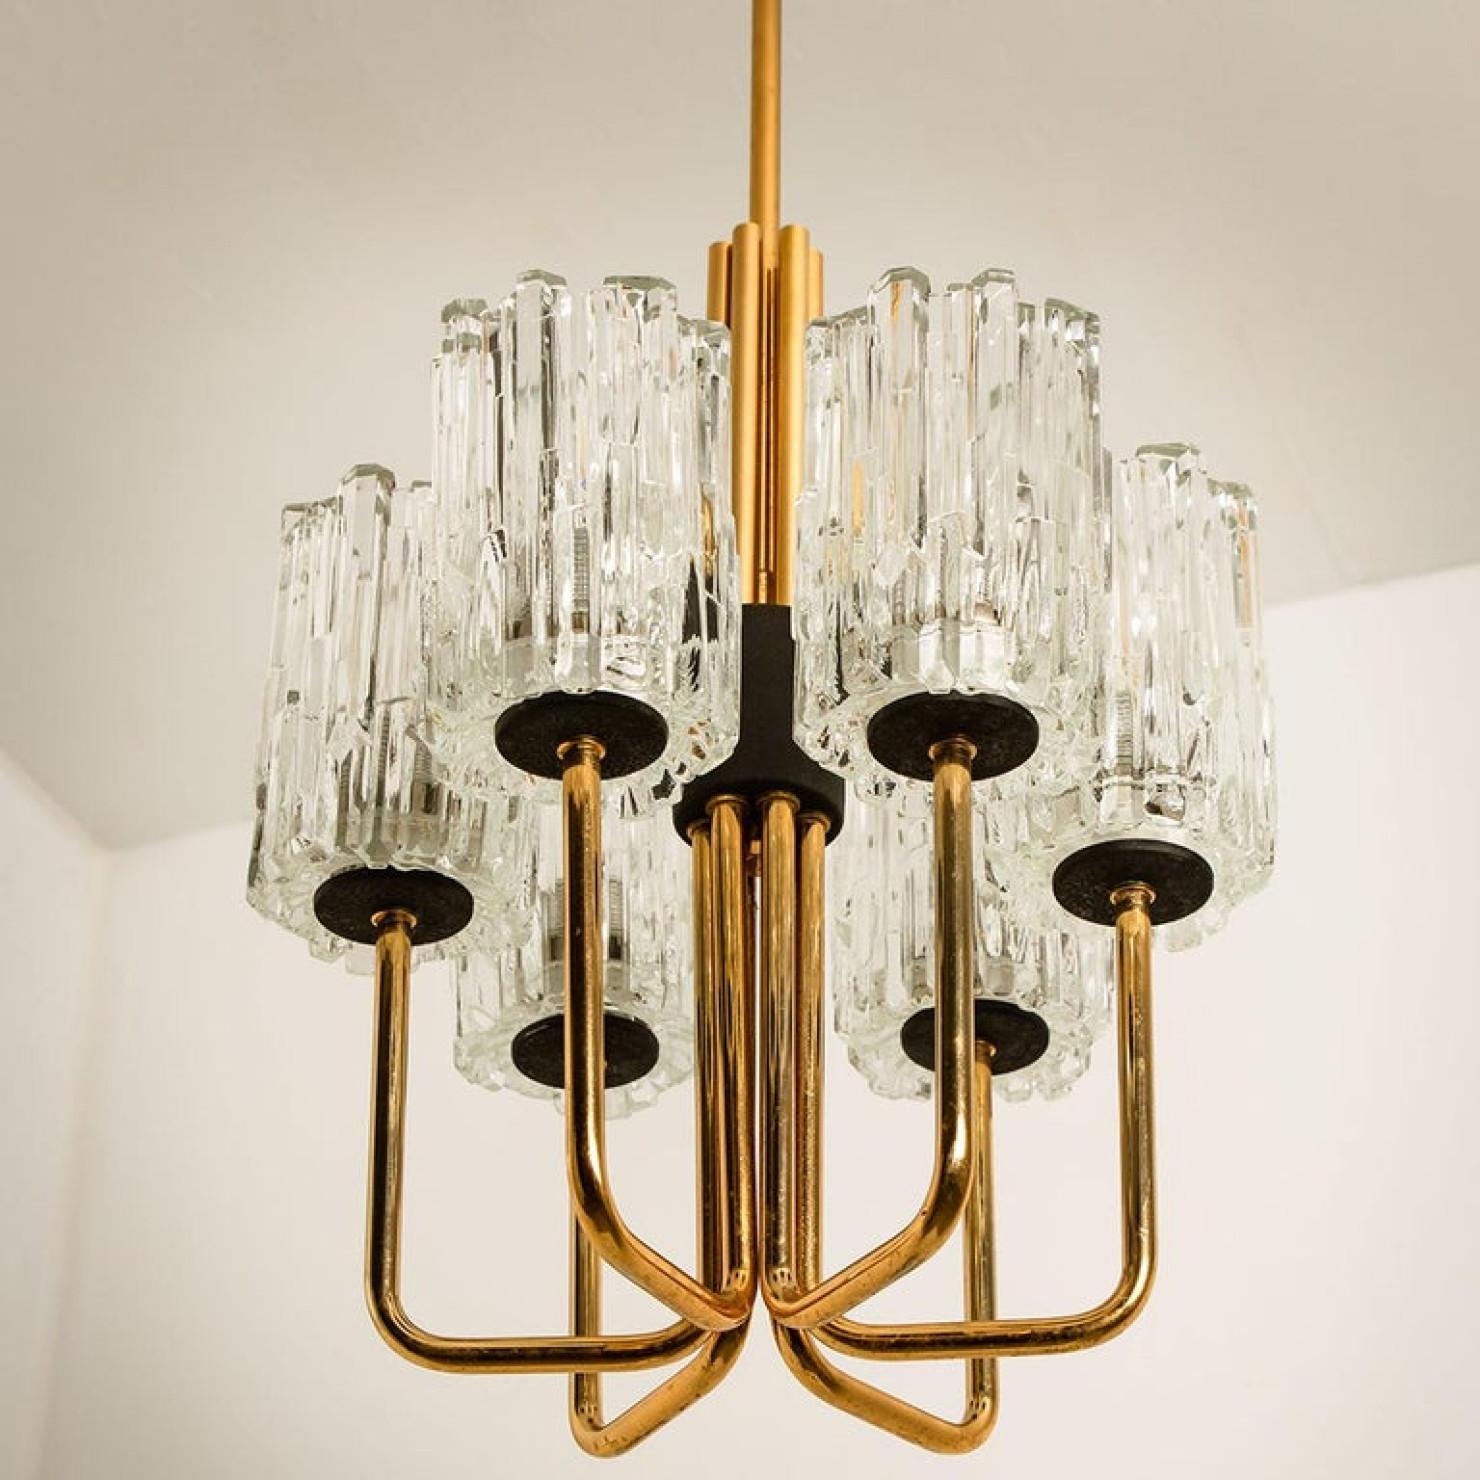 20th Century Midcentury Brass and Blown Glass Chandelier by Hillebrand, 1960s For Sale